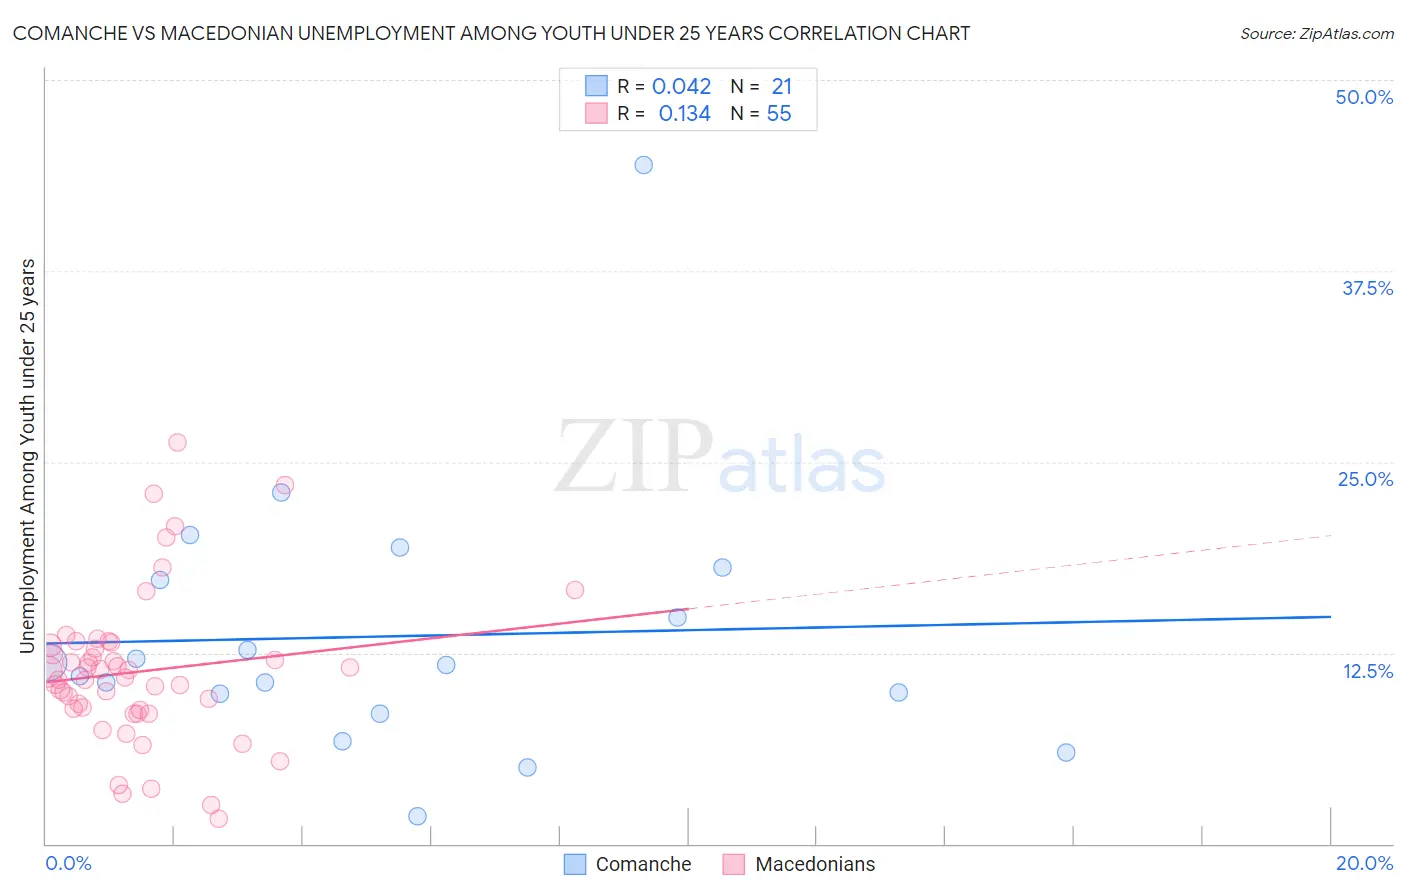 Comanche vs Macedonian Unemployment Among Youth under 25 years